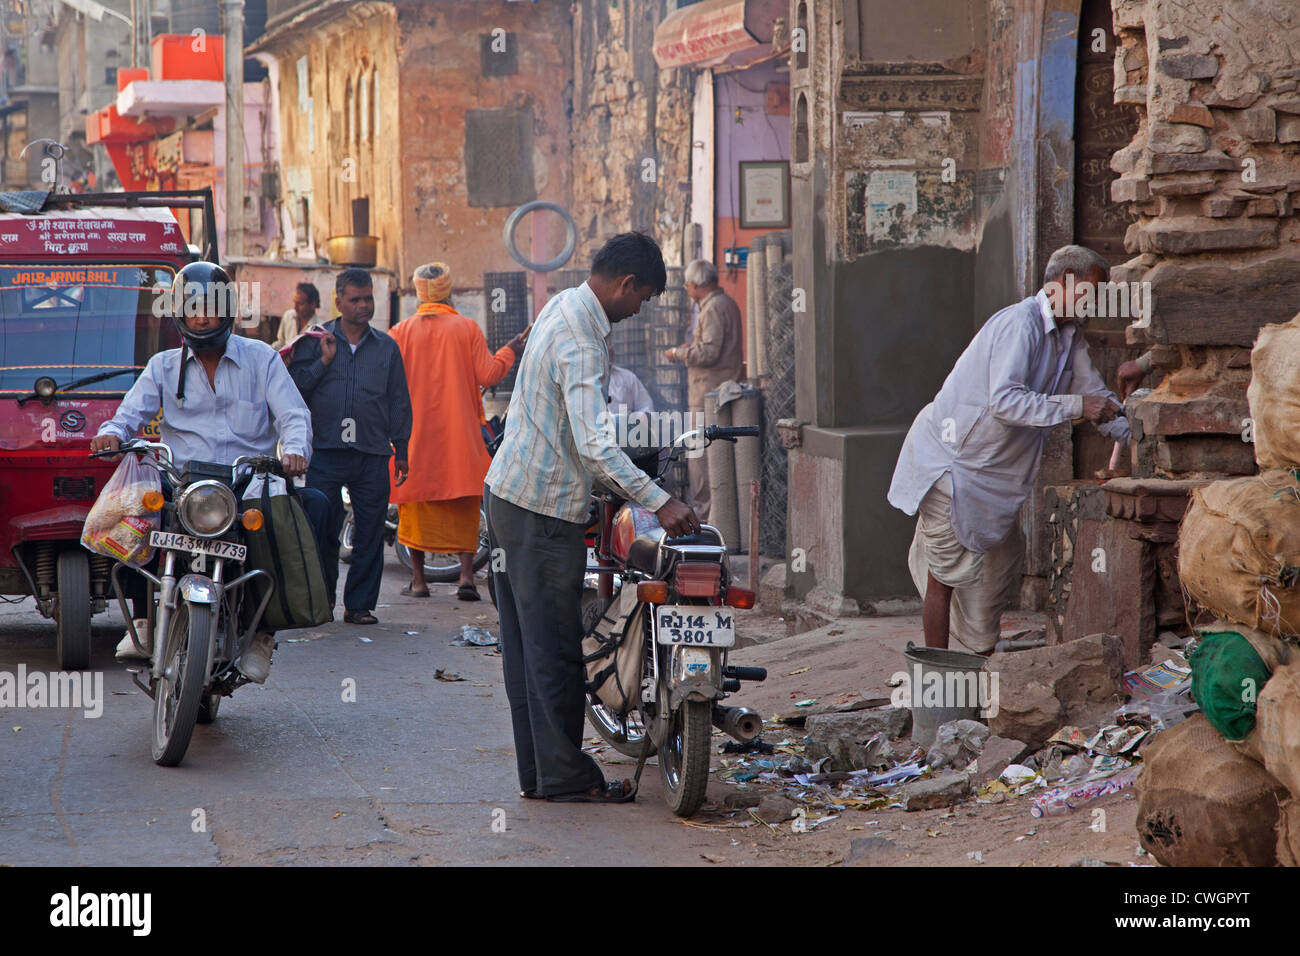 Street scene showing garbage in the pink city of Jaipur, Rajasthan, India Stock Photo